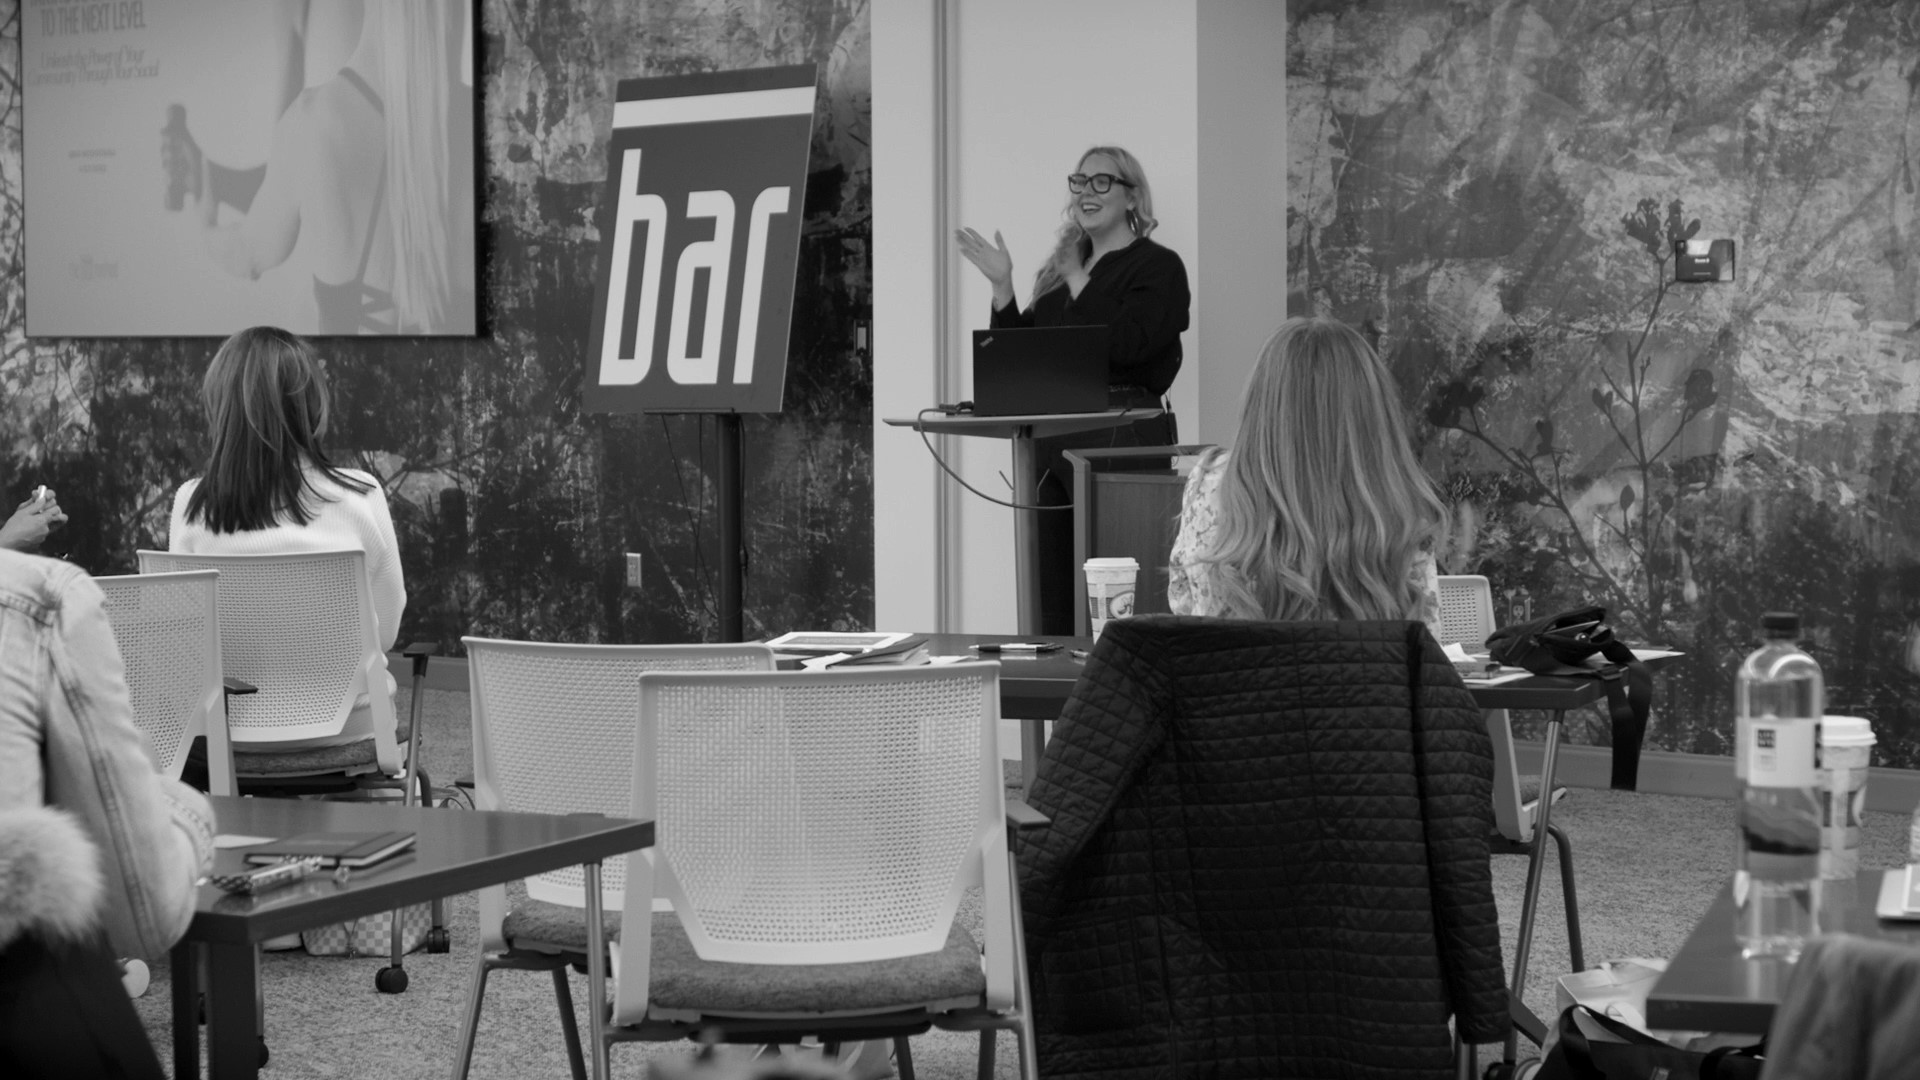 Black and white photo of woman presenting to an audience